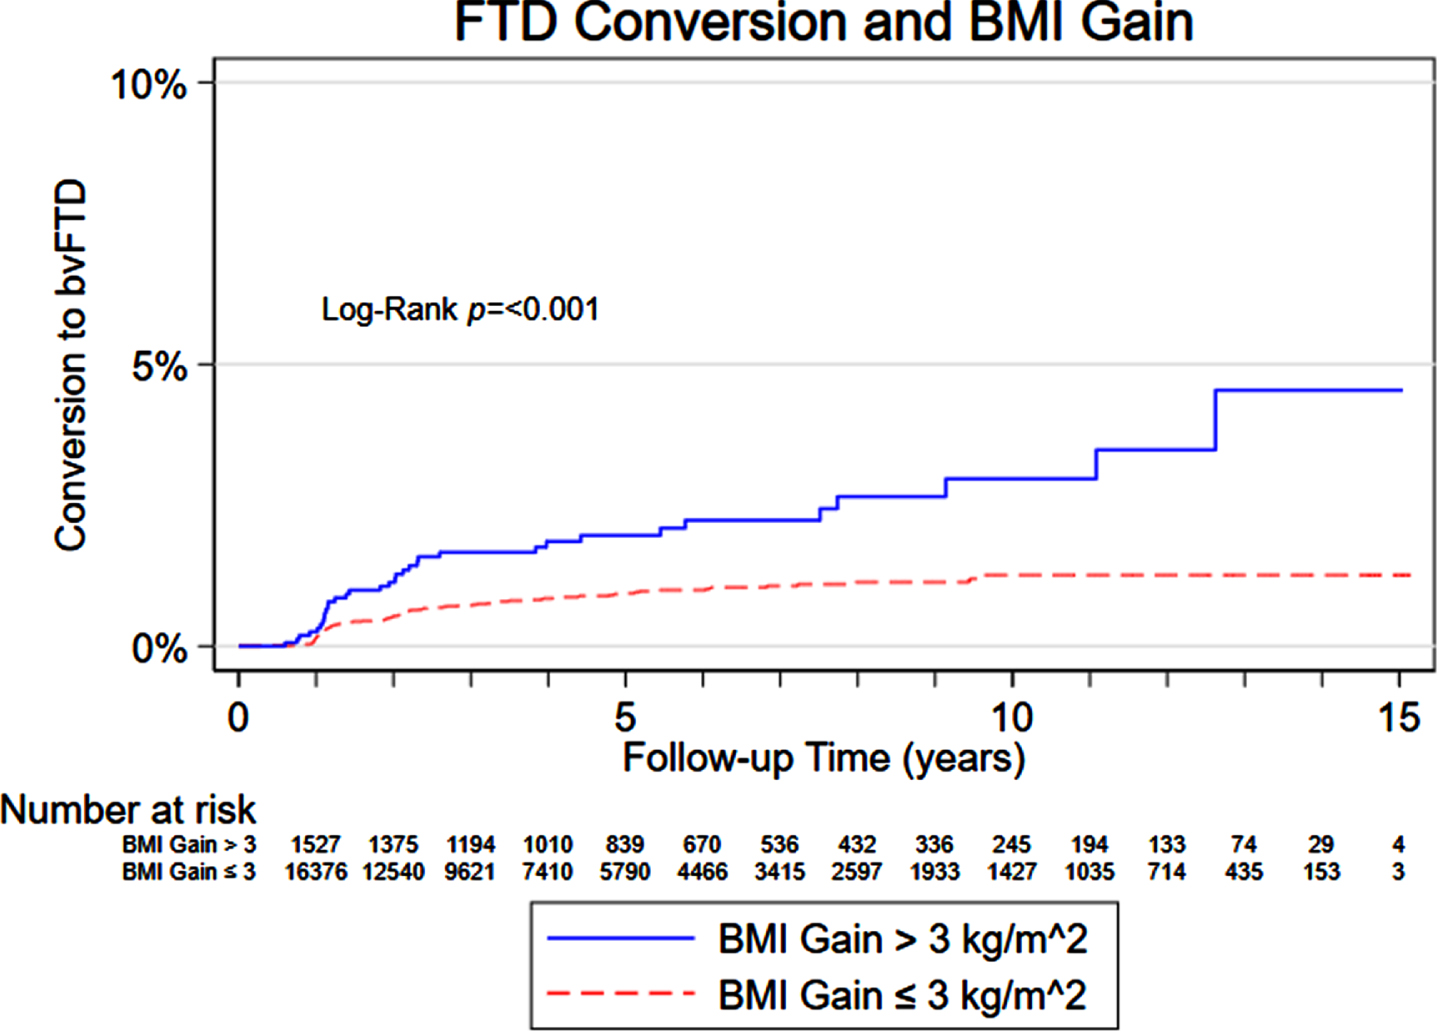 Risk of converting to FTD based on BMI gain.